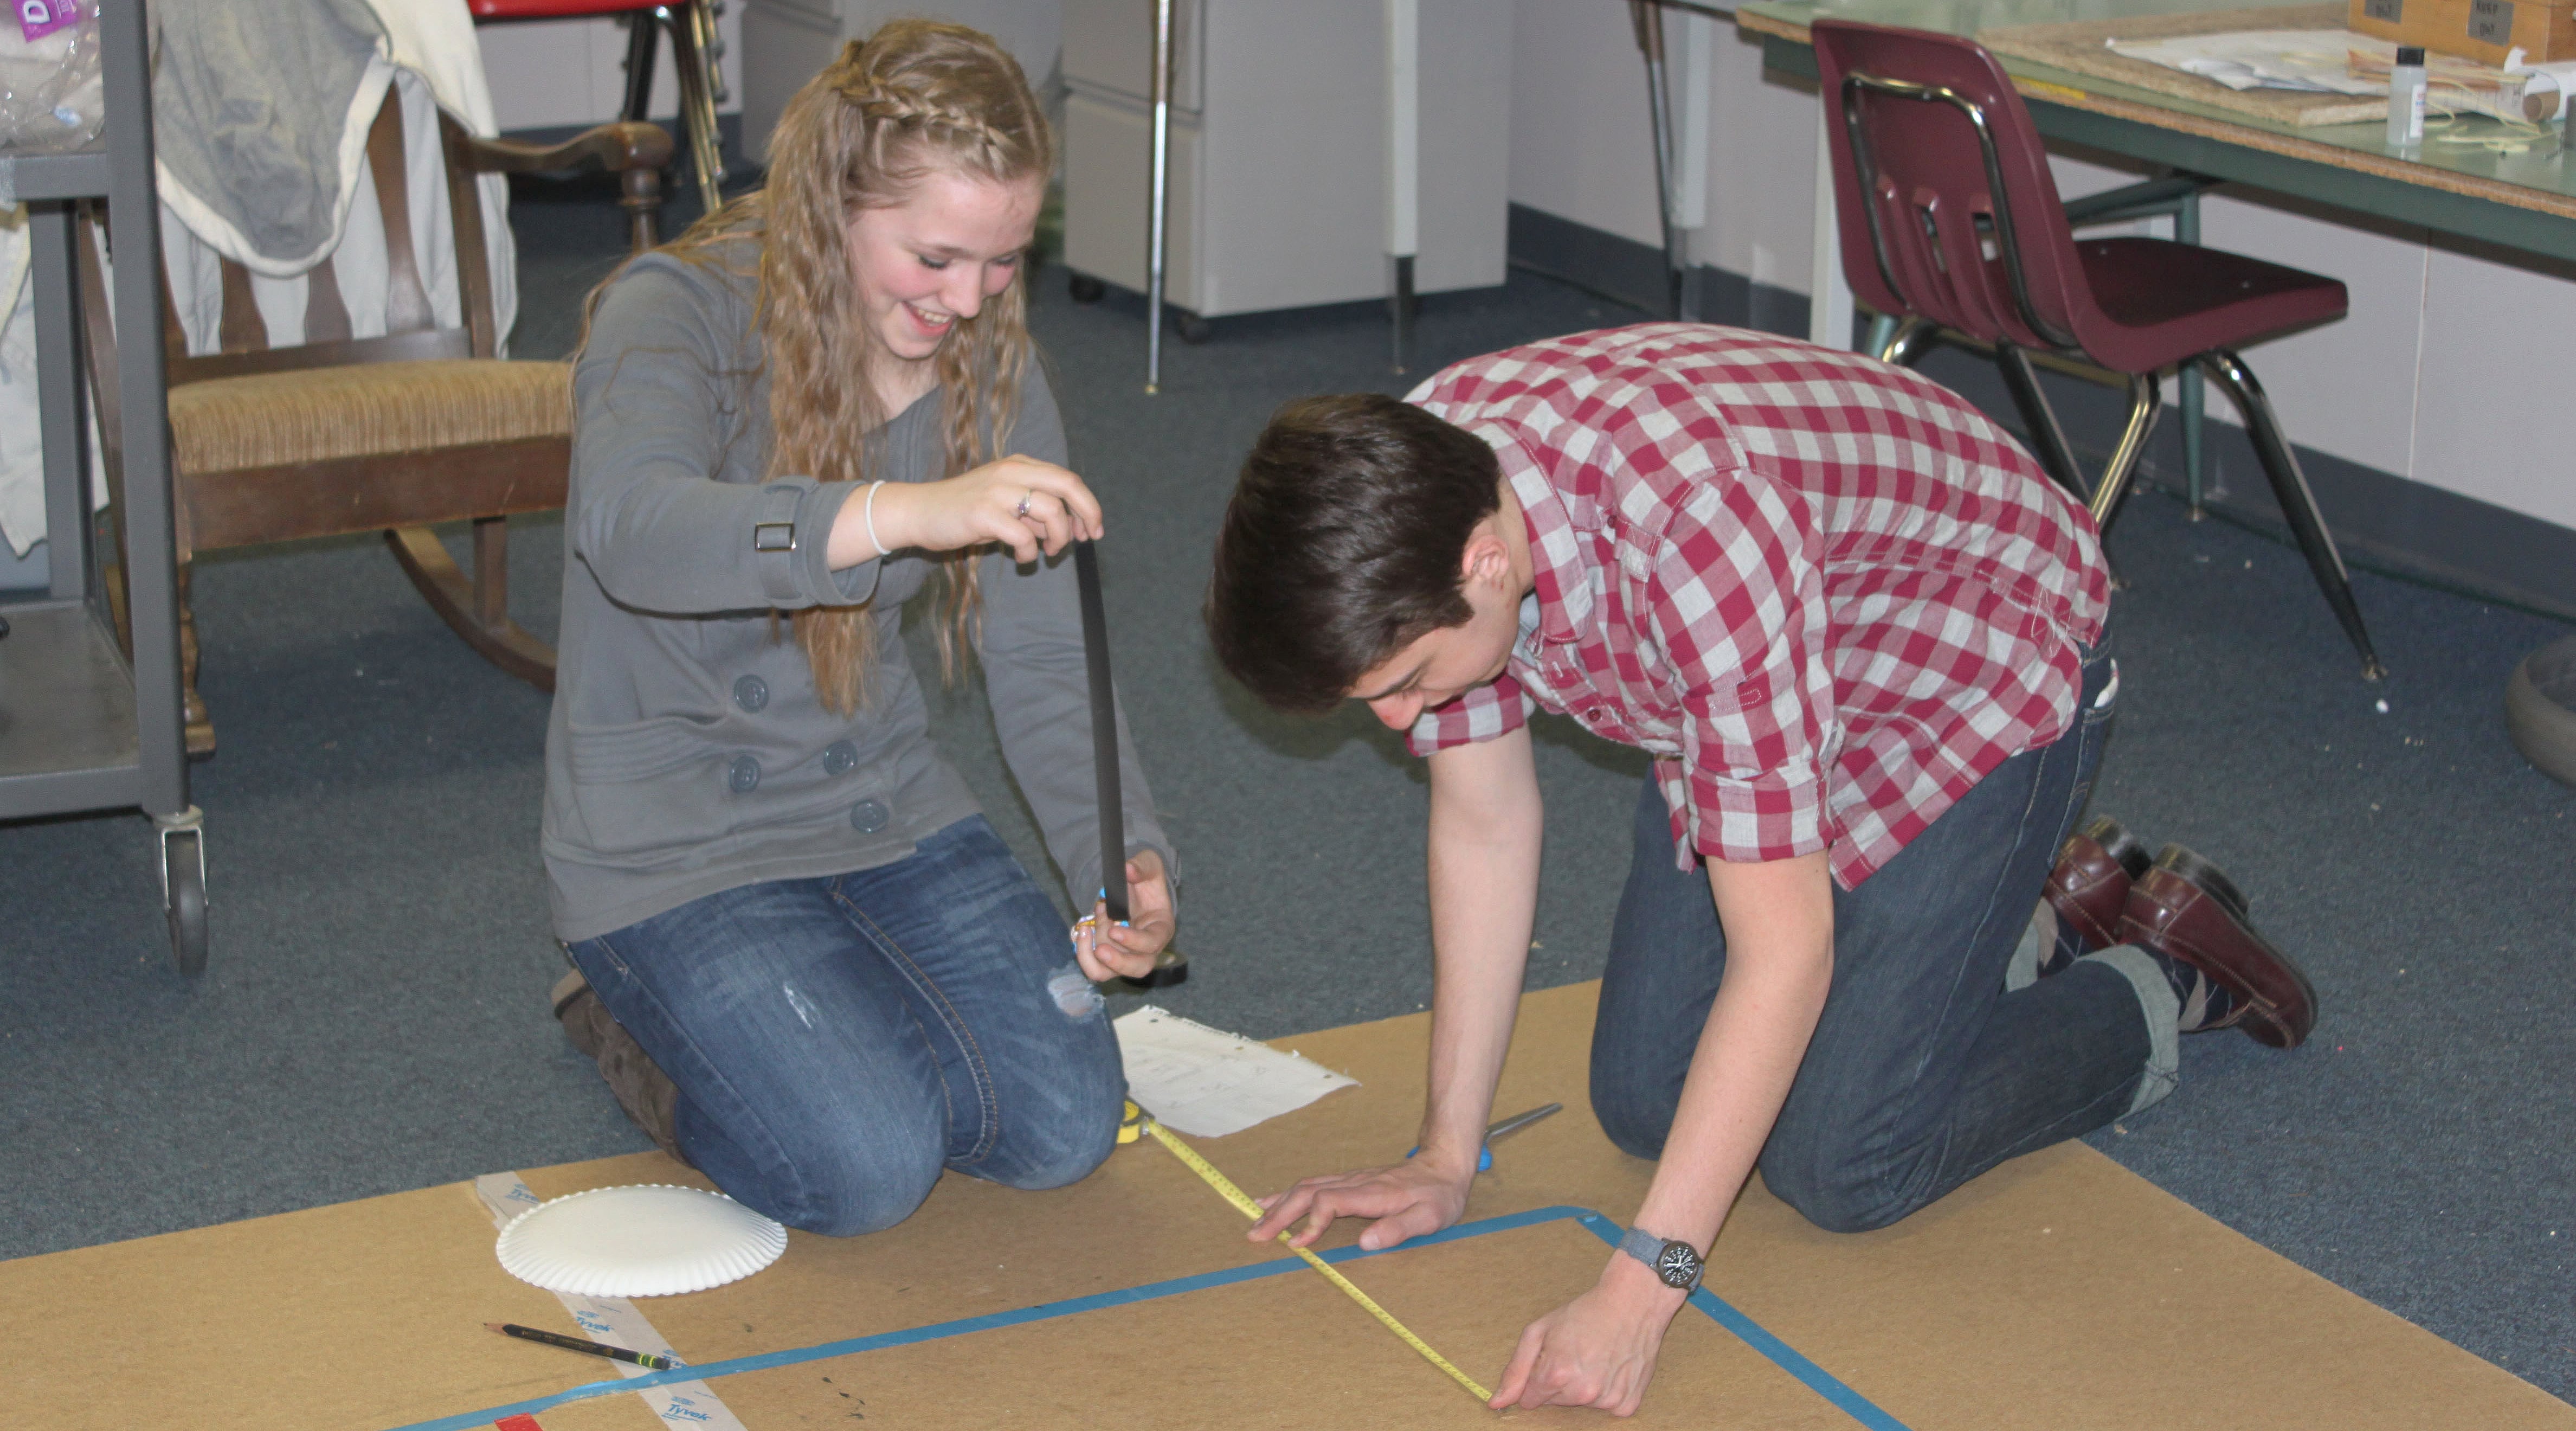 CHS Science Olympiad team members, including sophomore Katelynne Jones (left) and senior Ryan Gompertz (right) gathered Monday night to practice for the upcoming national tournament on May 20 and 21 in Wisconsin. Five days a week the team works out of its "clubhouse," one of the portables at Lacamas Heights Elementary School. Coach Ron Wright has called the facility one of the keys to the team's success.